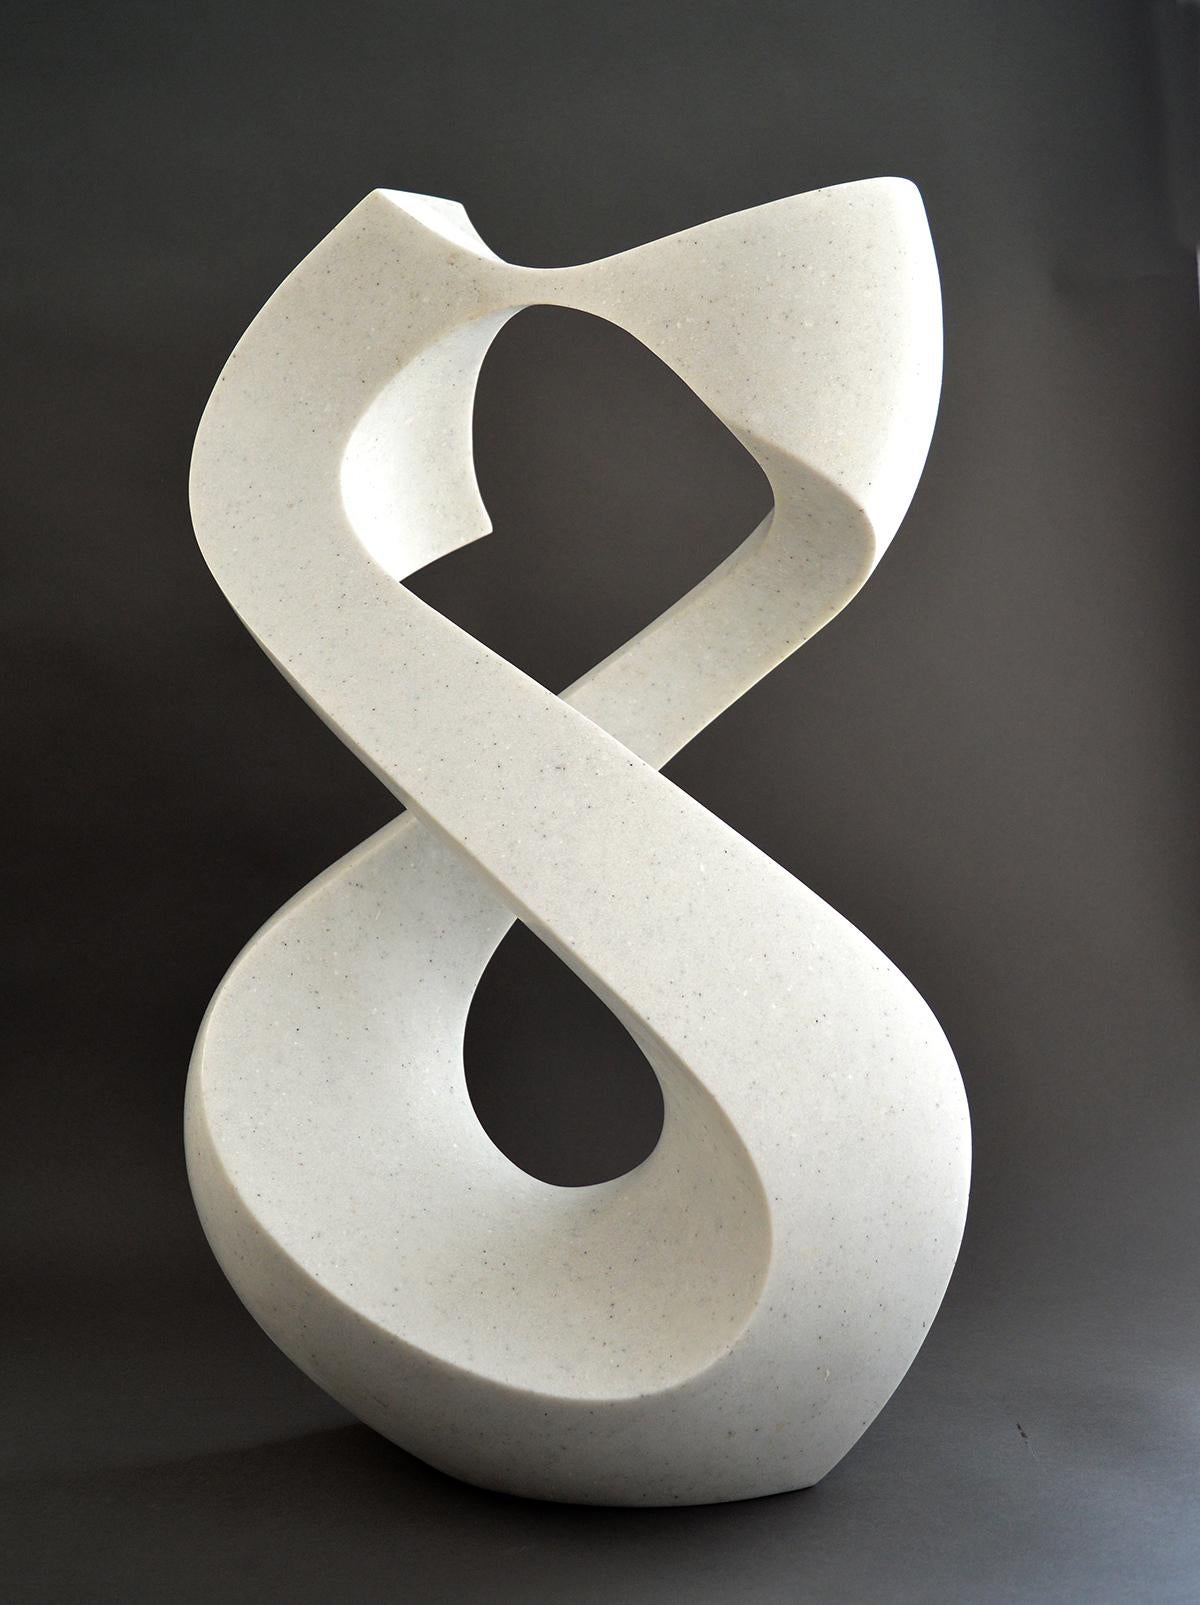 This sculpture weighs approximately 80 pounds it sits vertically without a base. This item can be purchased on commission basis, please allow 8 - 12 weeks before shipping. 

Smooth surfaced, engineered white marble is sculpted into an elegant figure